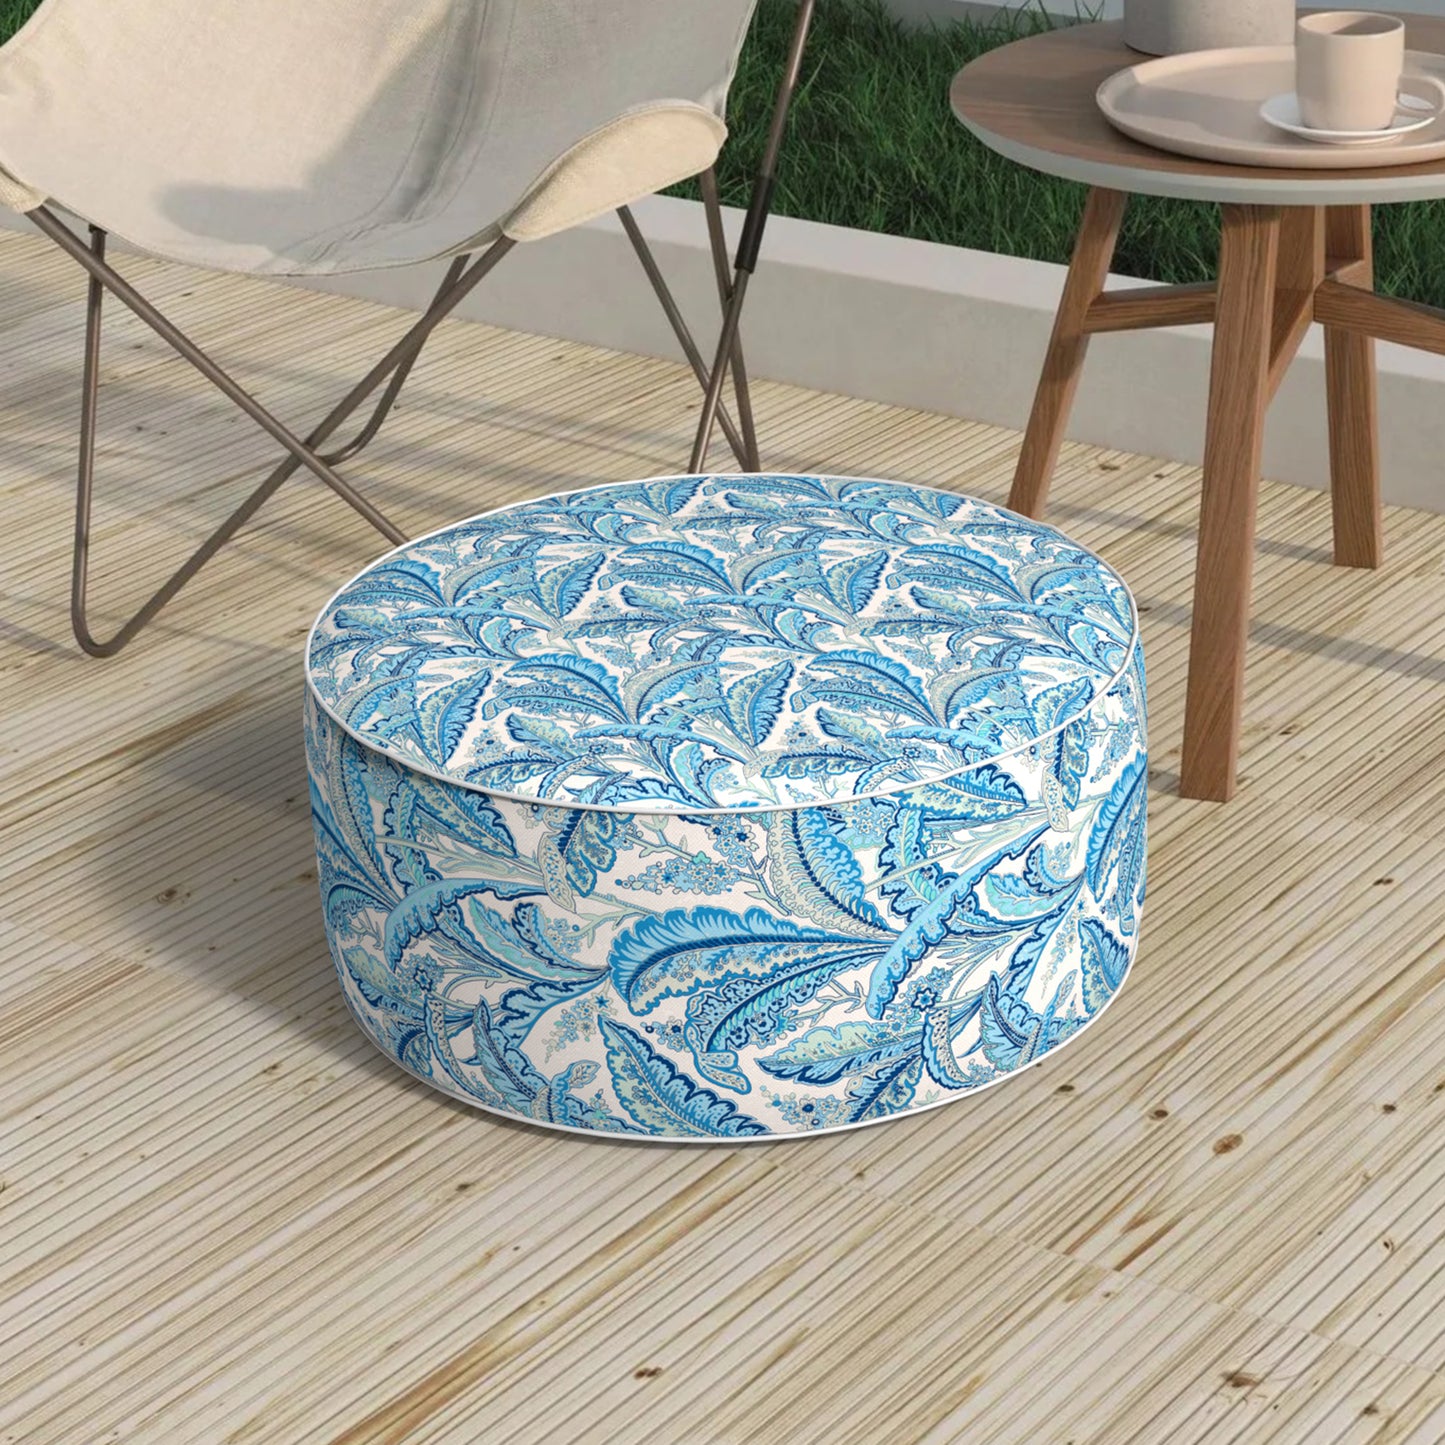 Melody Elephant Patio Inflatable Ottoman, 21x9 Inch Portable Stool Ottoman with Handle, Outdoor Round Footrest Stool for Garden Camping, Monotone Leaves Blue